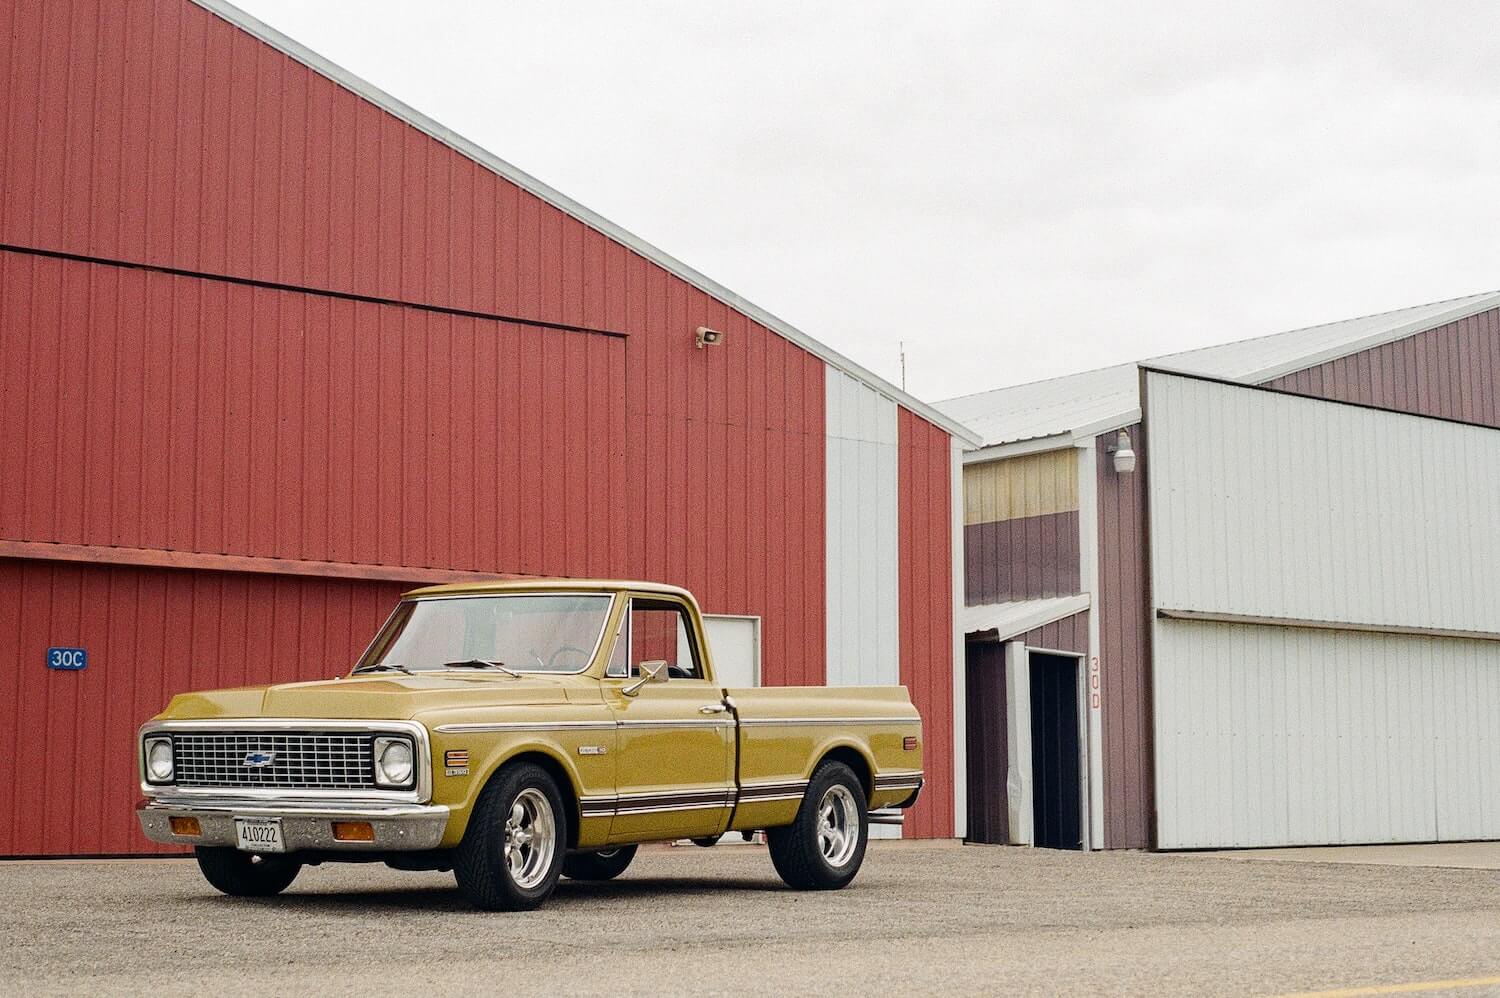 A golden colored Chevrolet 1500 square body generation pickup truck parked in front of a red barn.